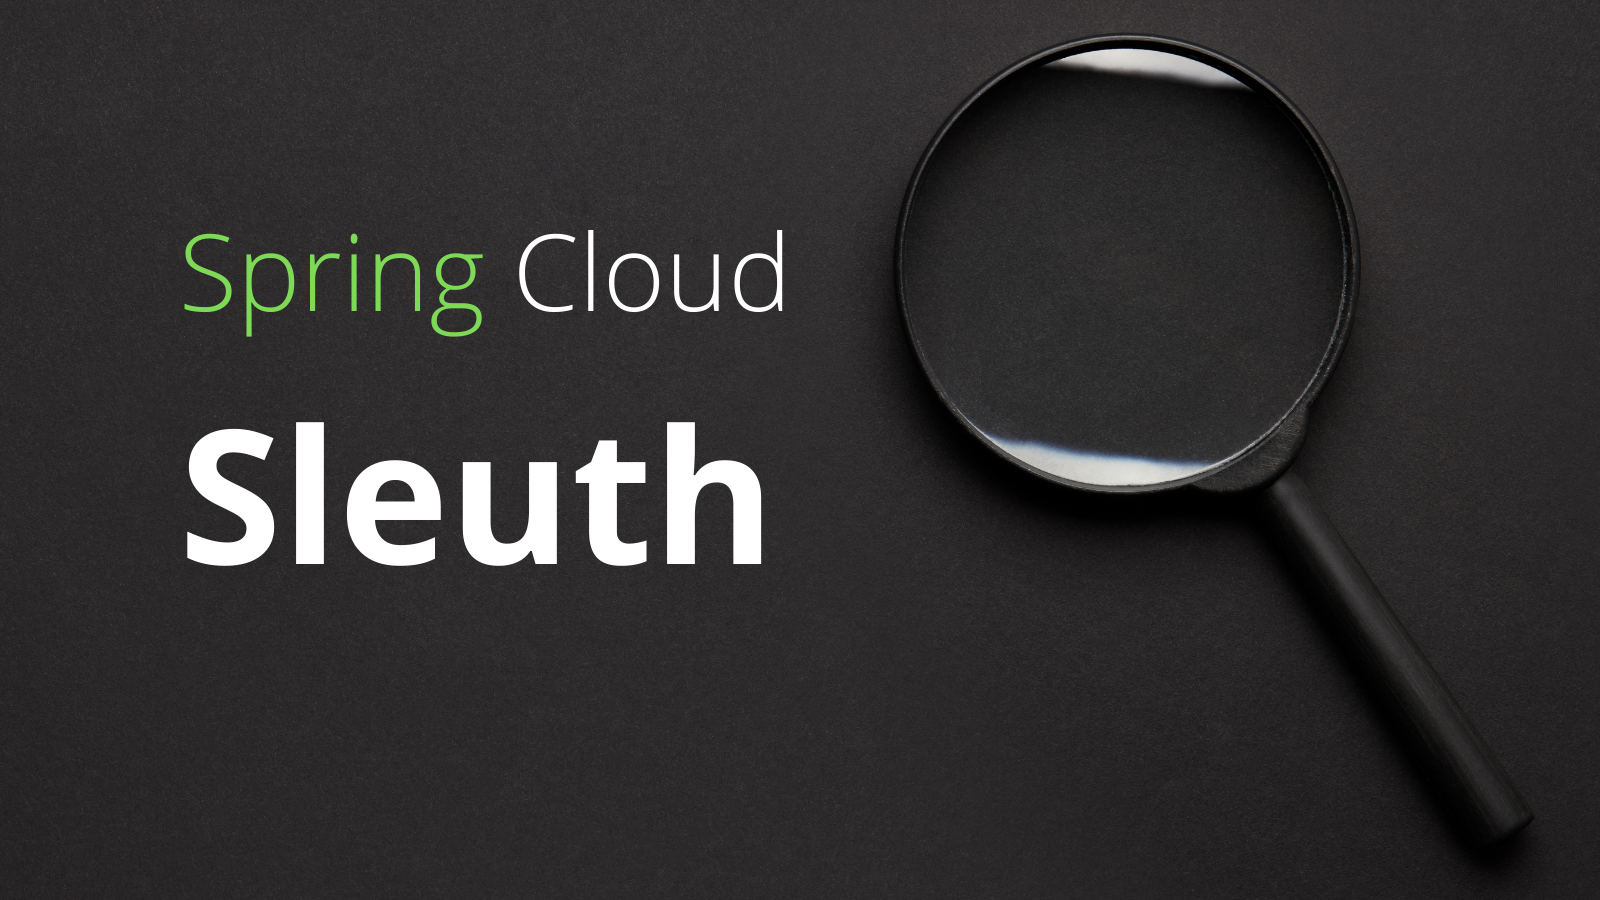 Spring Cloud Sleuth, 10 X Magnifying Mirror Bootstrap